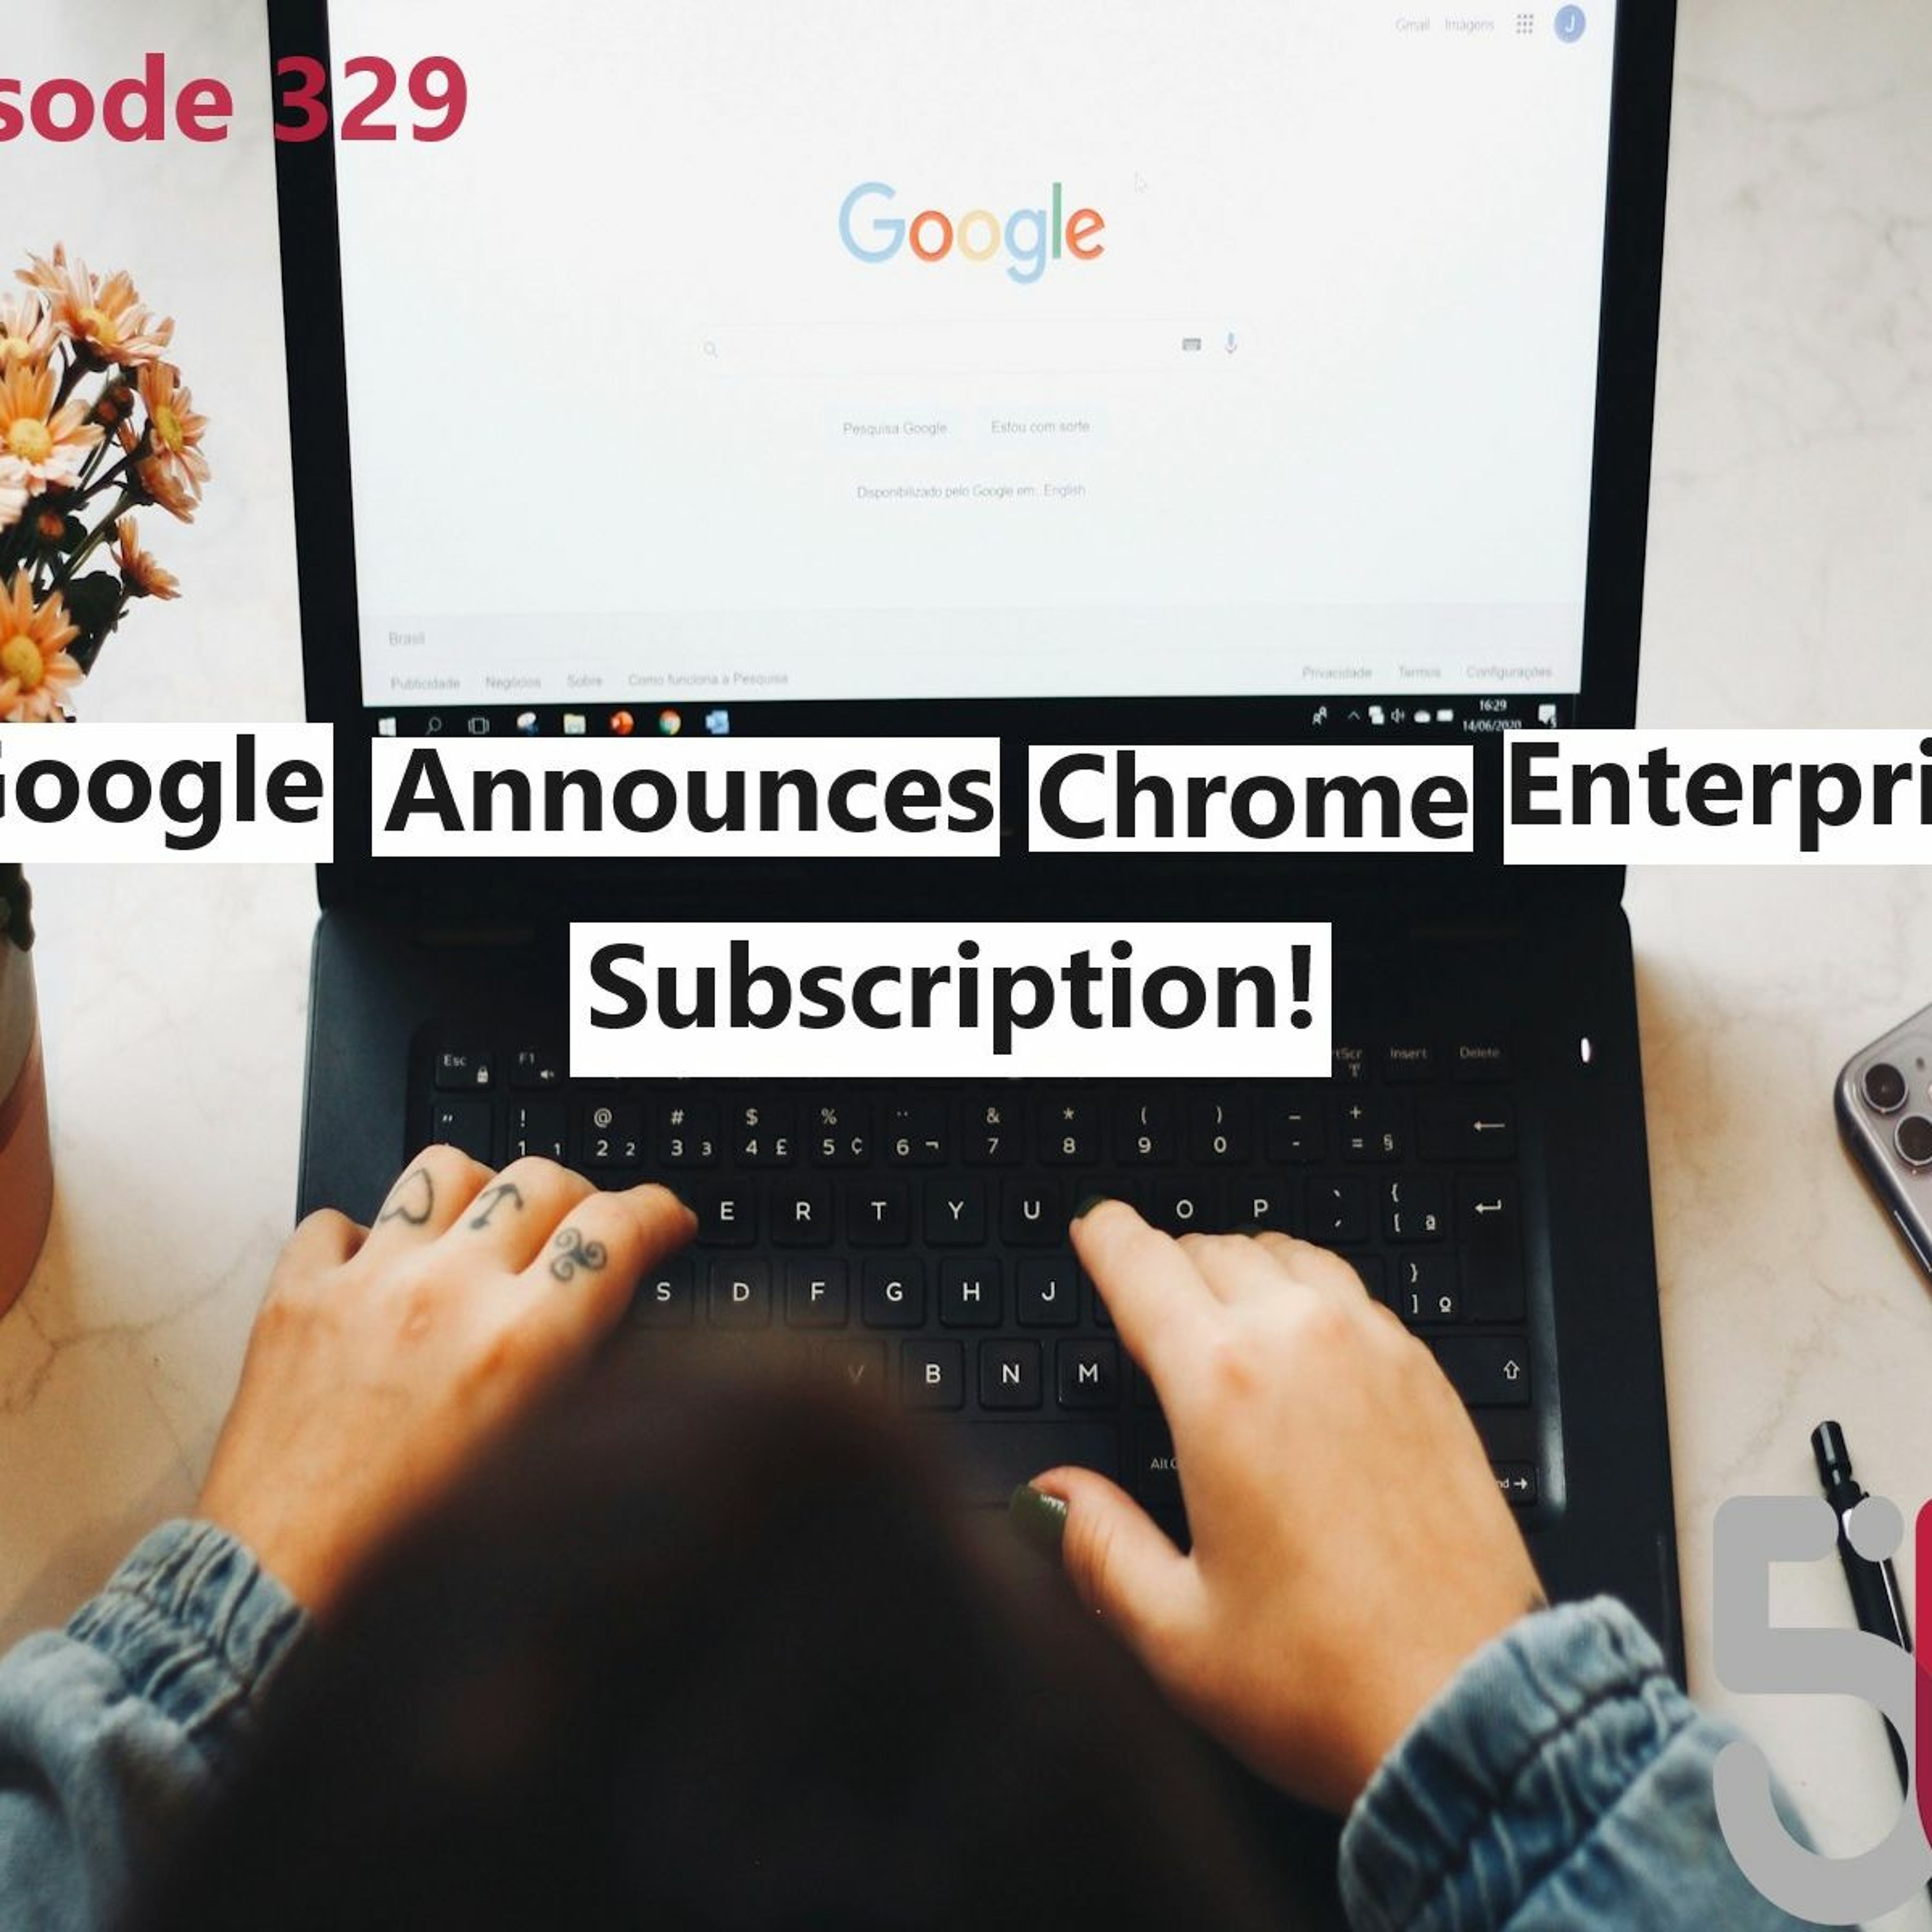 New Chrome Enterprise Browser Subscription! Patch Tuesday News! ESXi Hosts Under Attack!